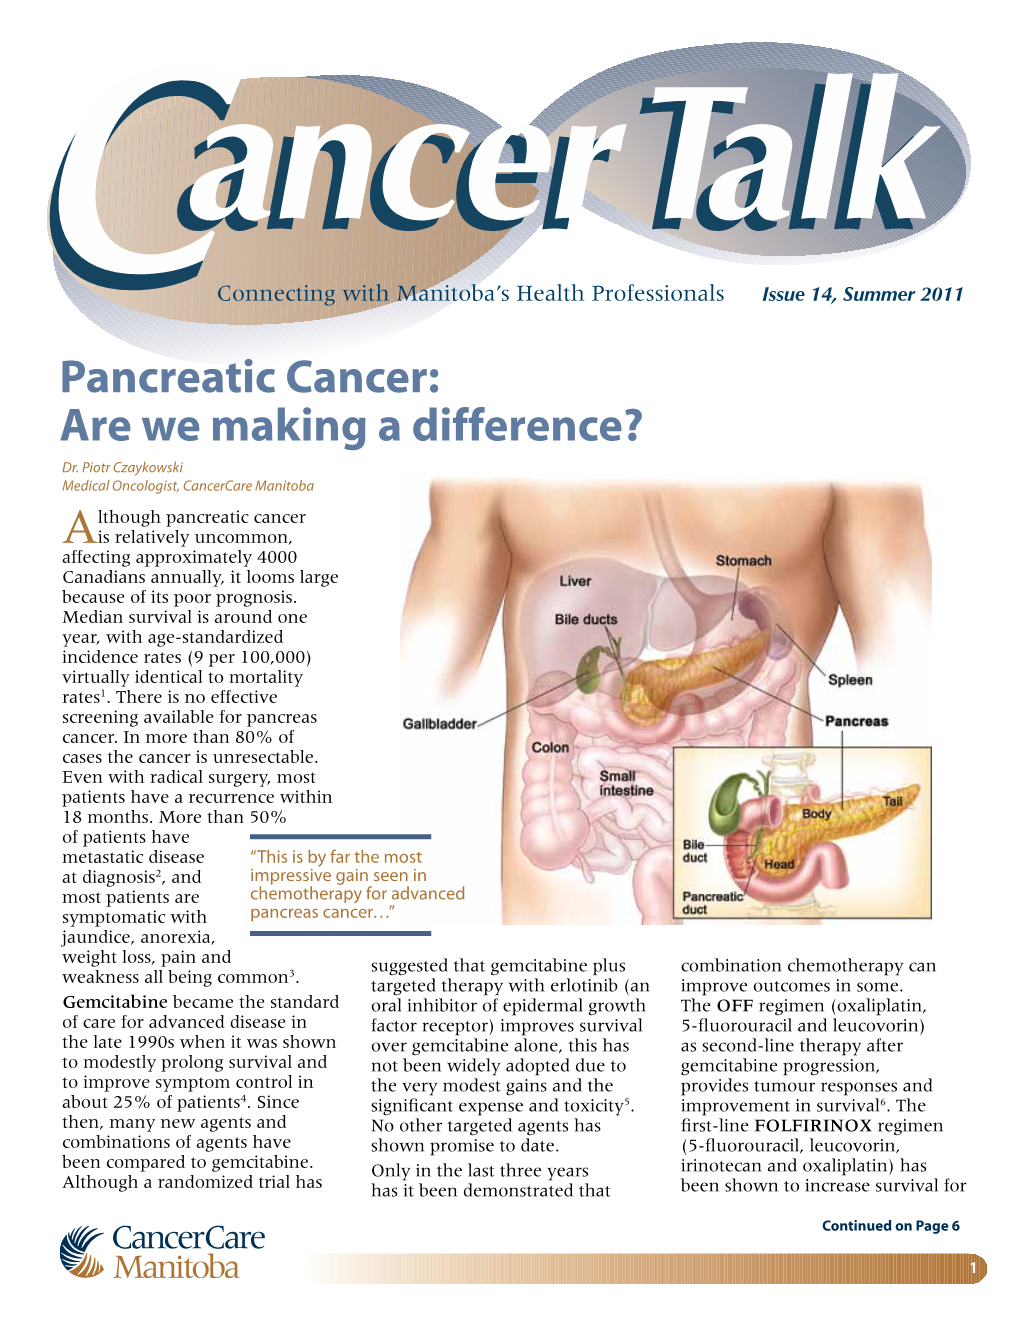 Pancreatic Cancer: Are We Making a Difference? Dr